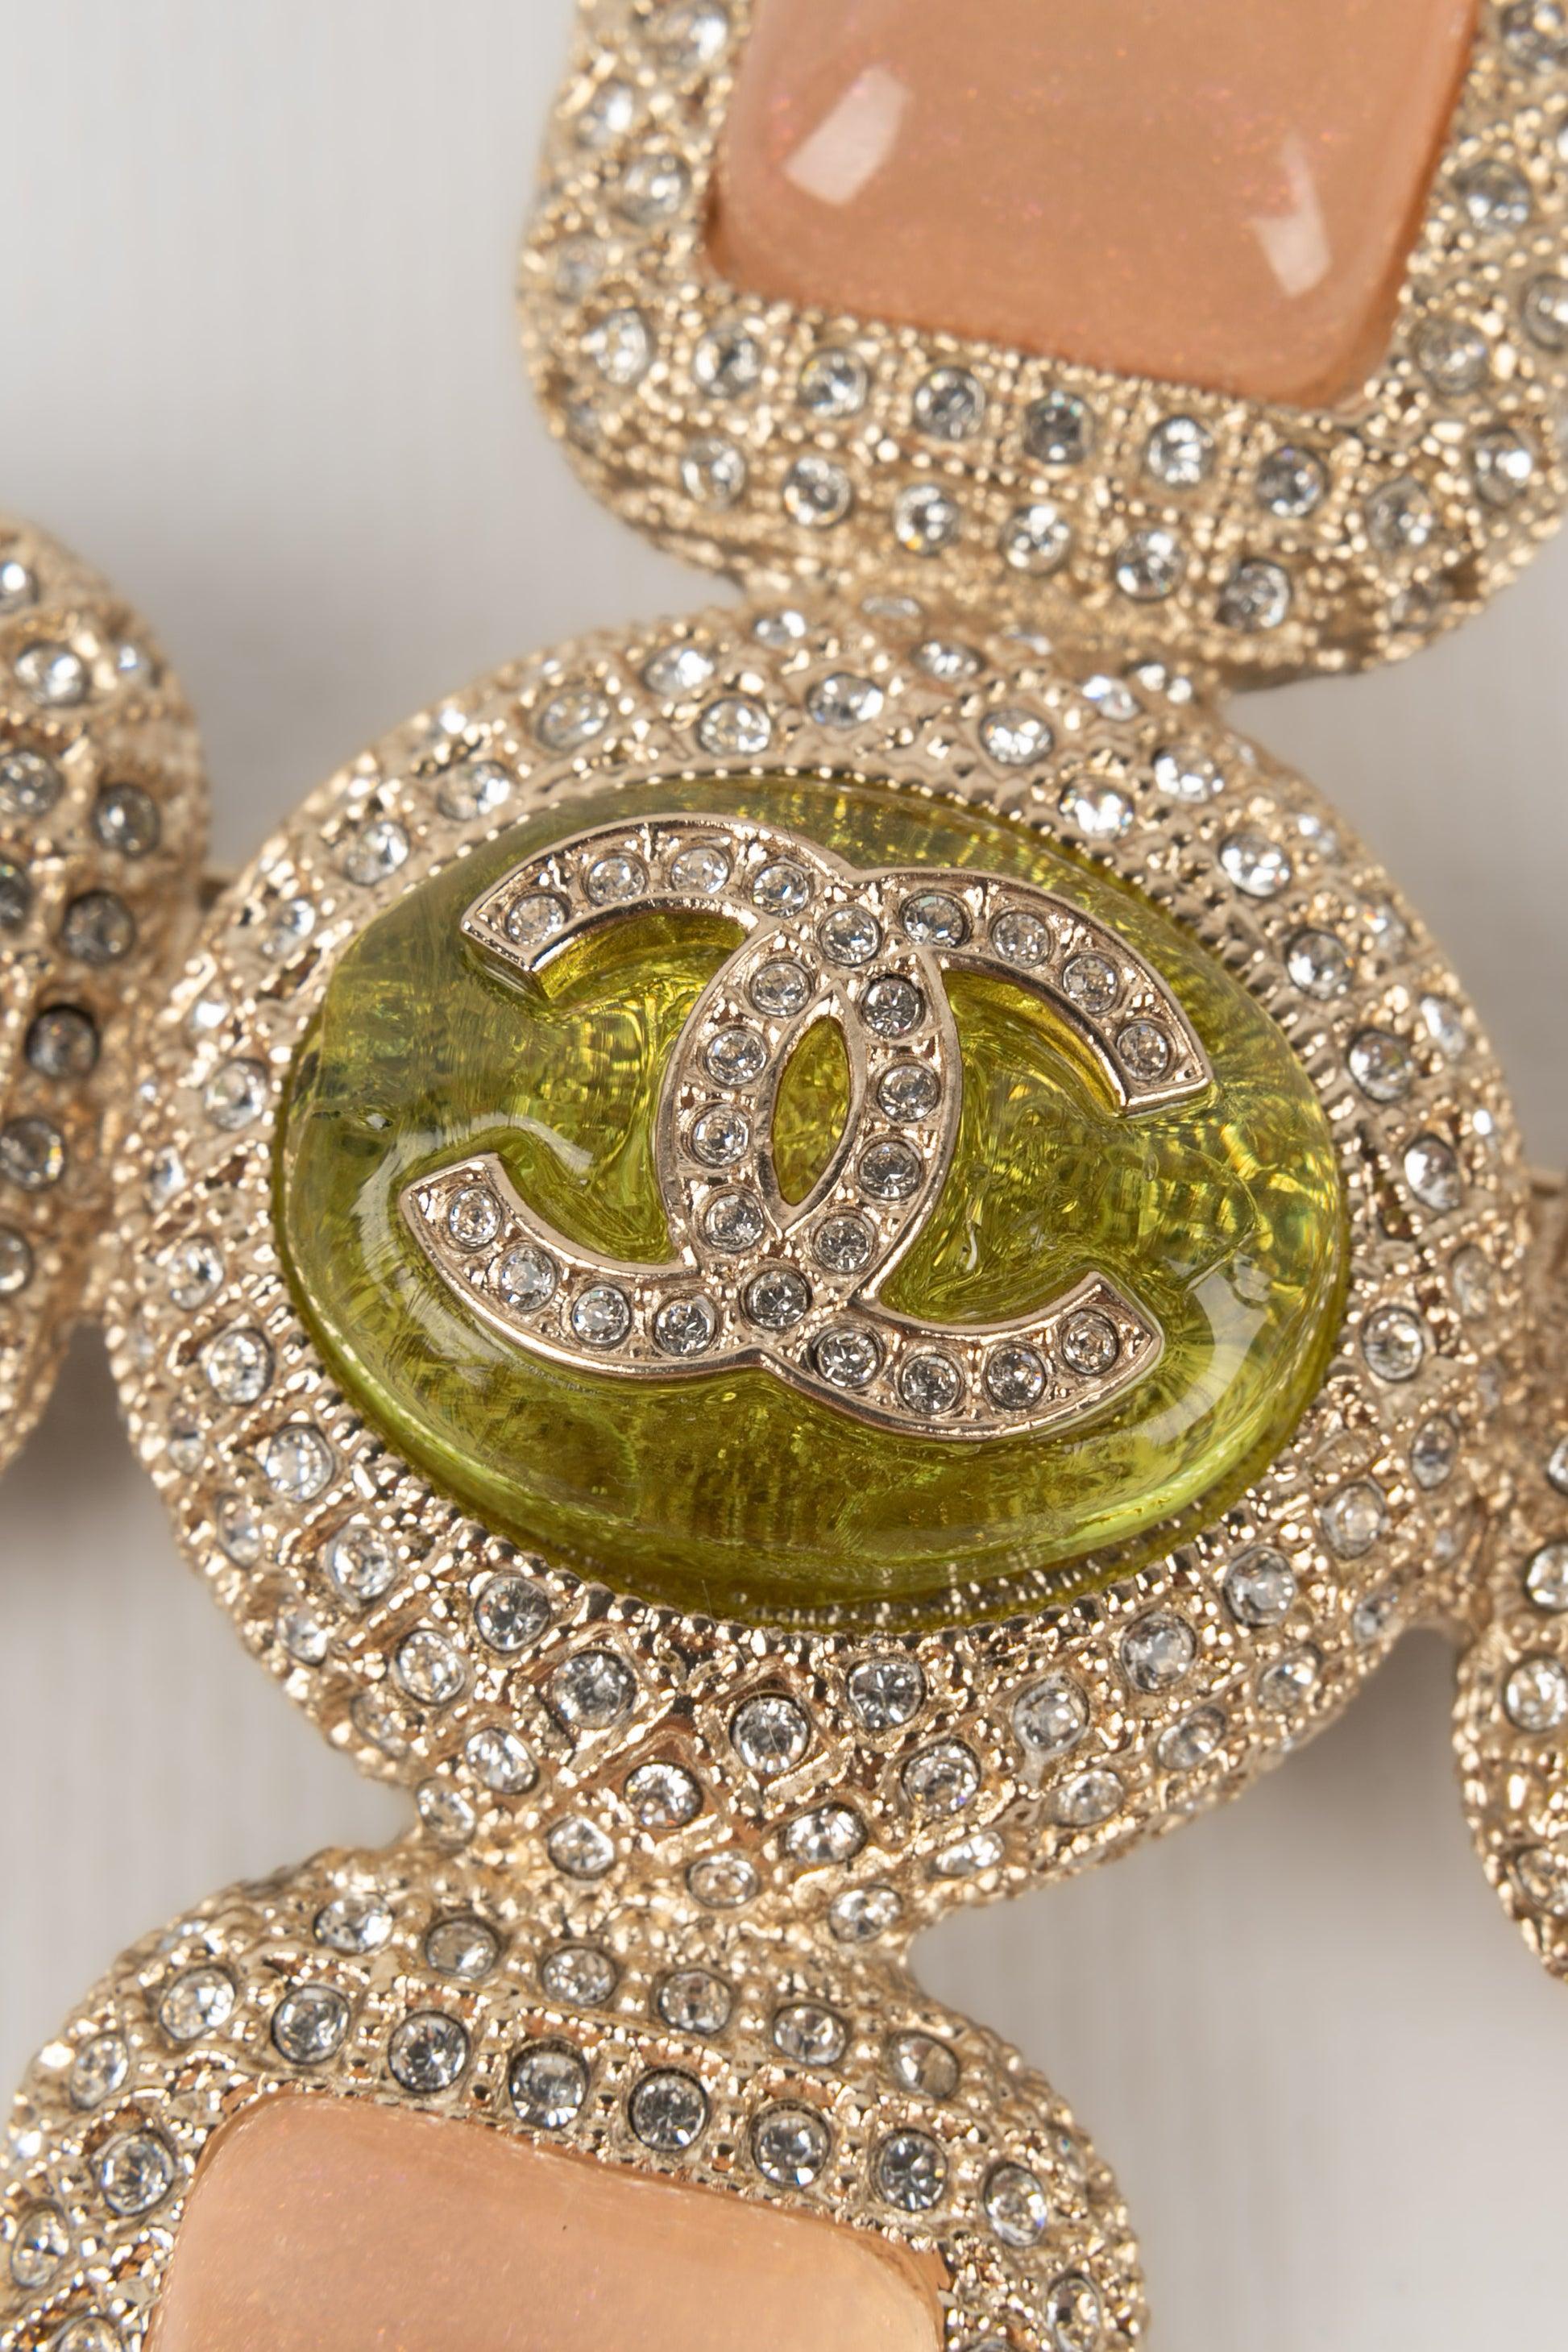 Chanel Champagne Metal Brooch Ornamented with Rhinestones and Resin, 2020 1